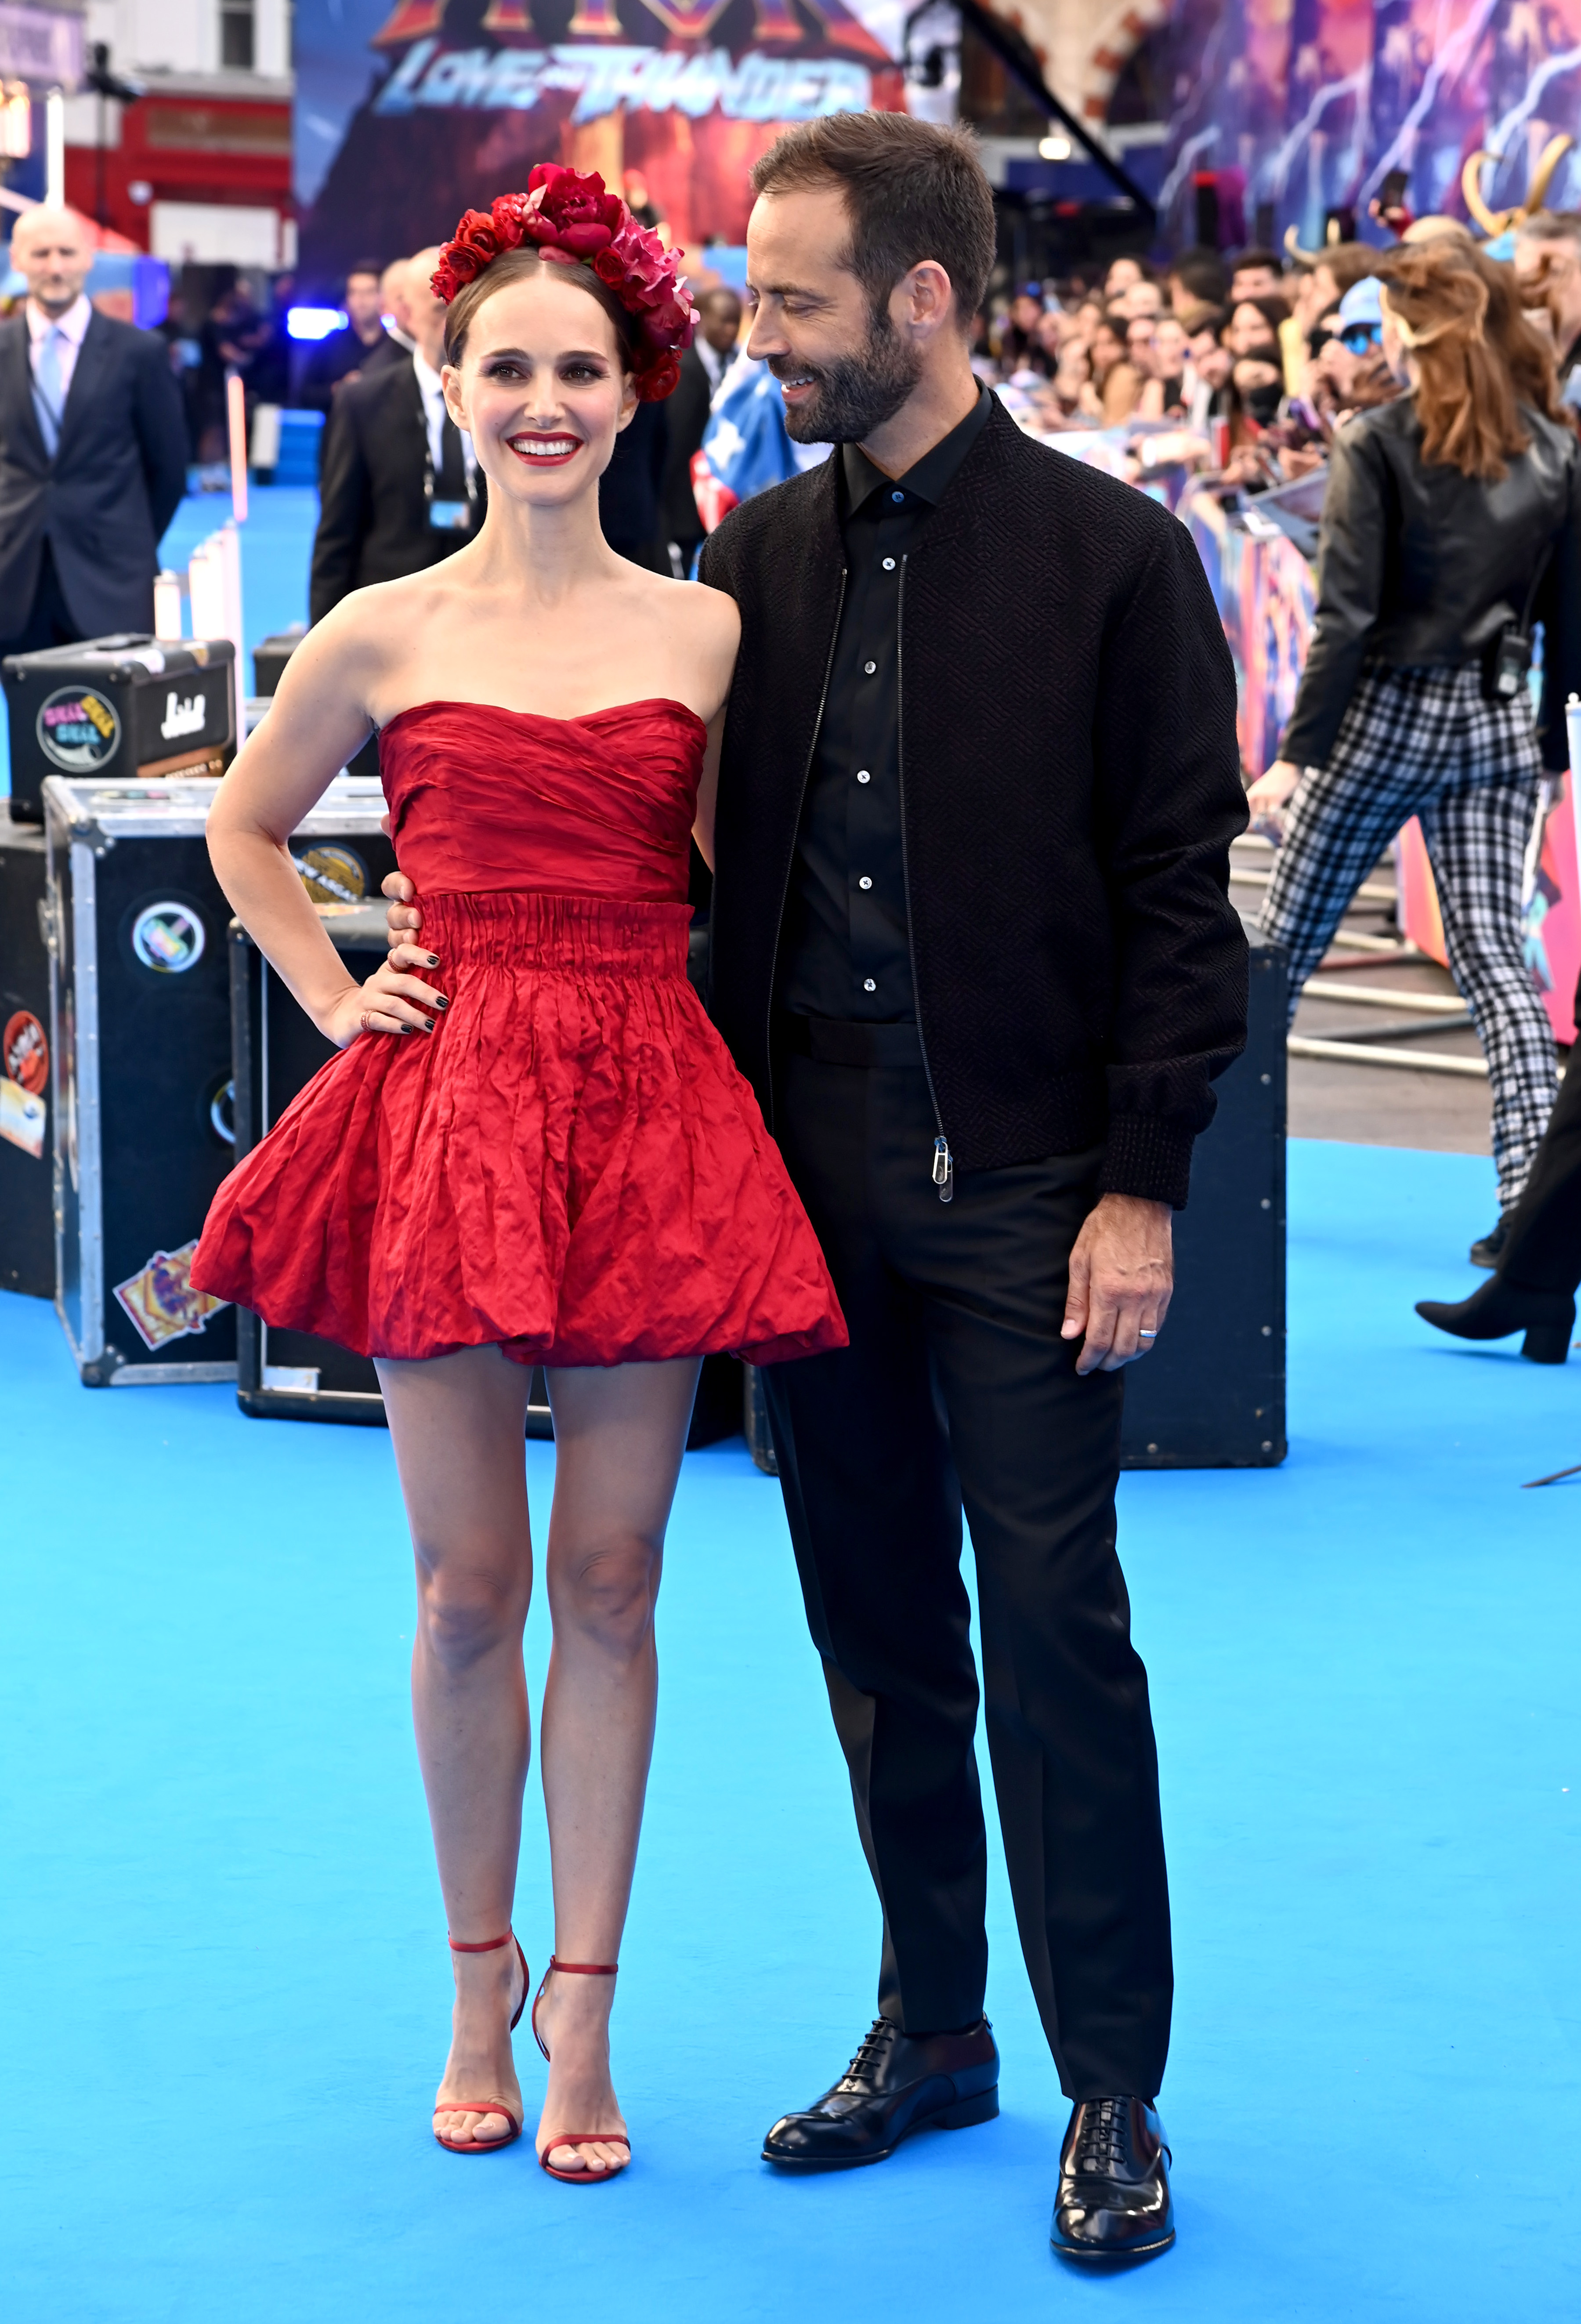 Natalie Portman and Benjamin Millepied in London, England on July 5, 2022 | Source: Getty Images